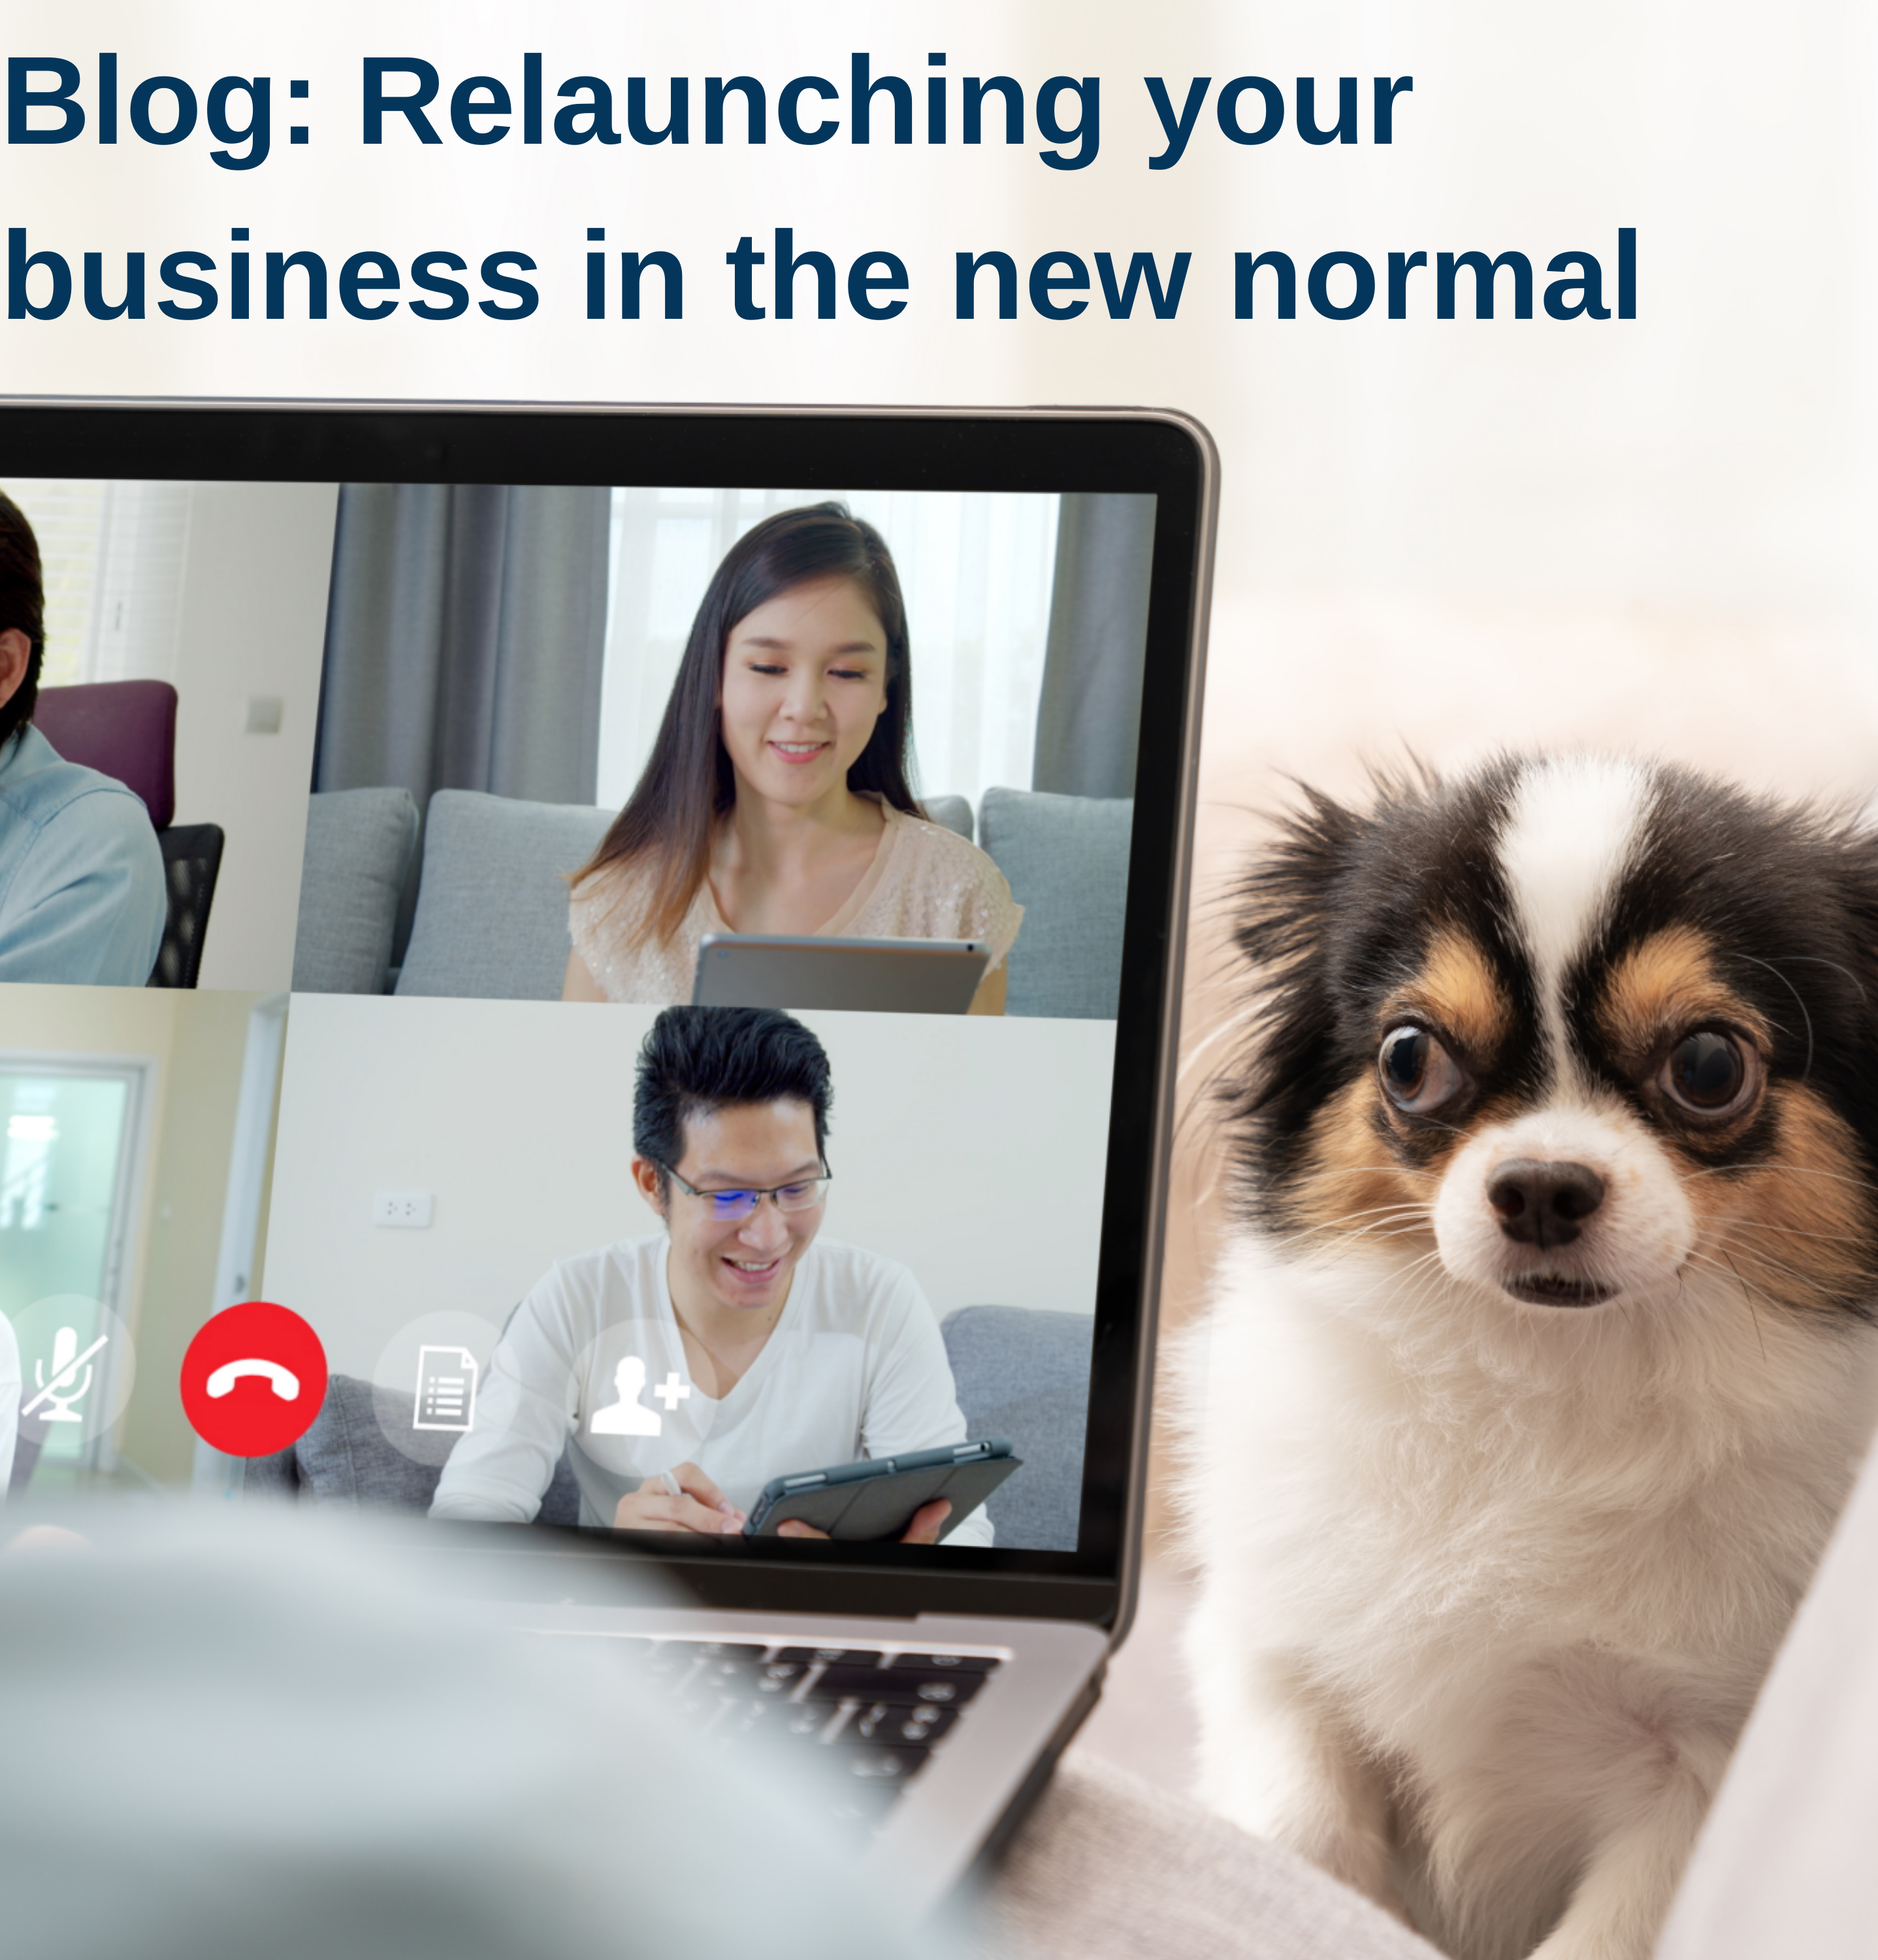 Blog post: Relaunching your business in the new normal